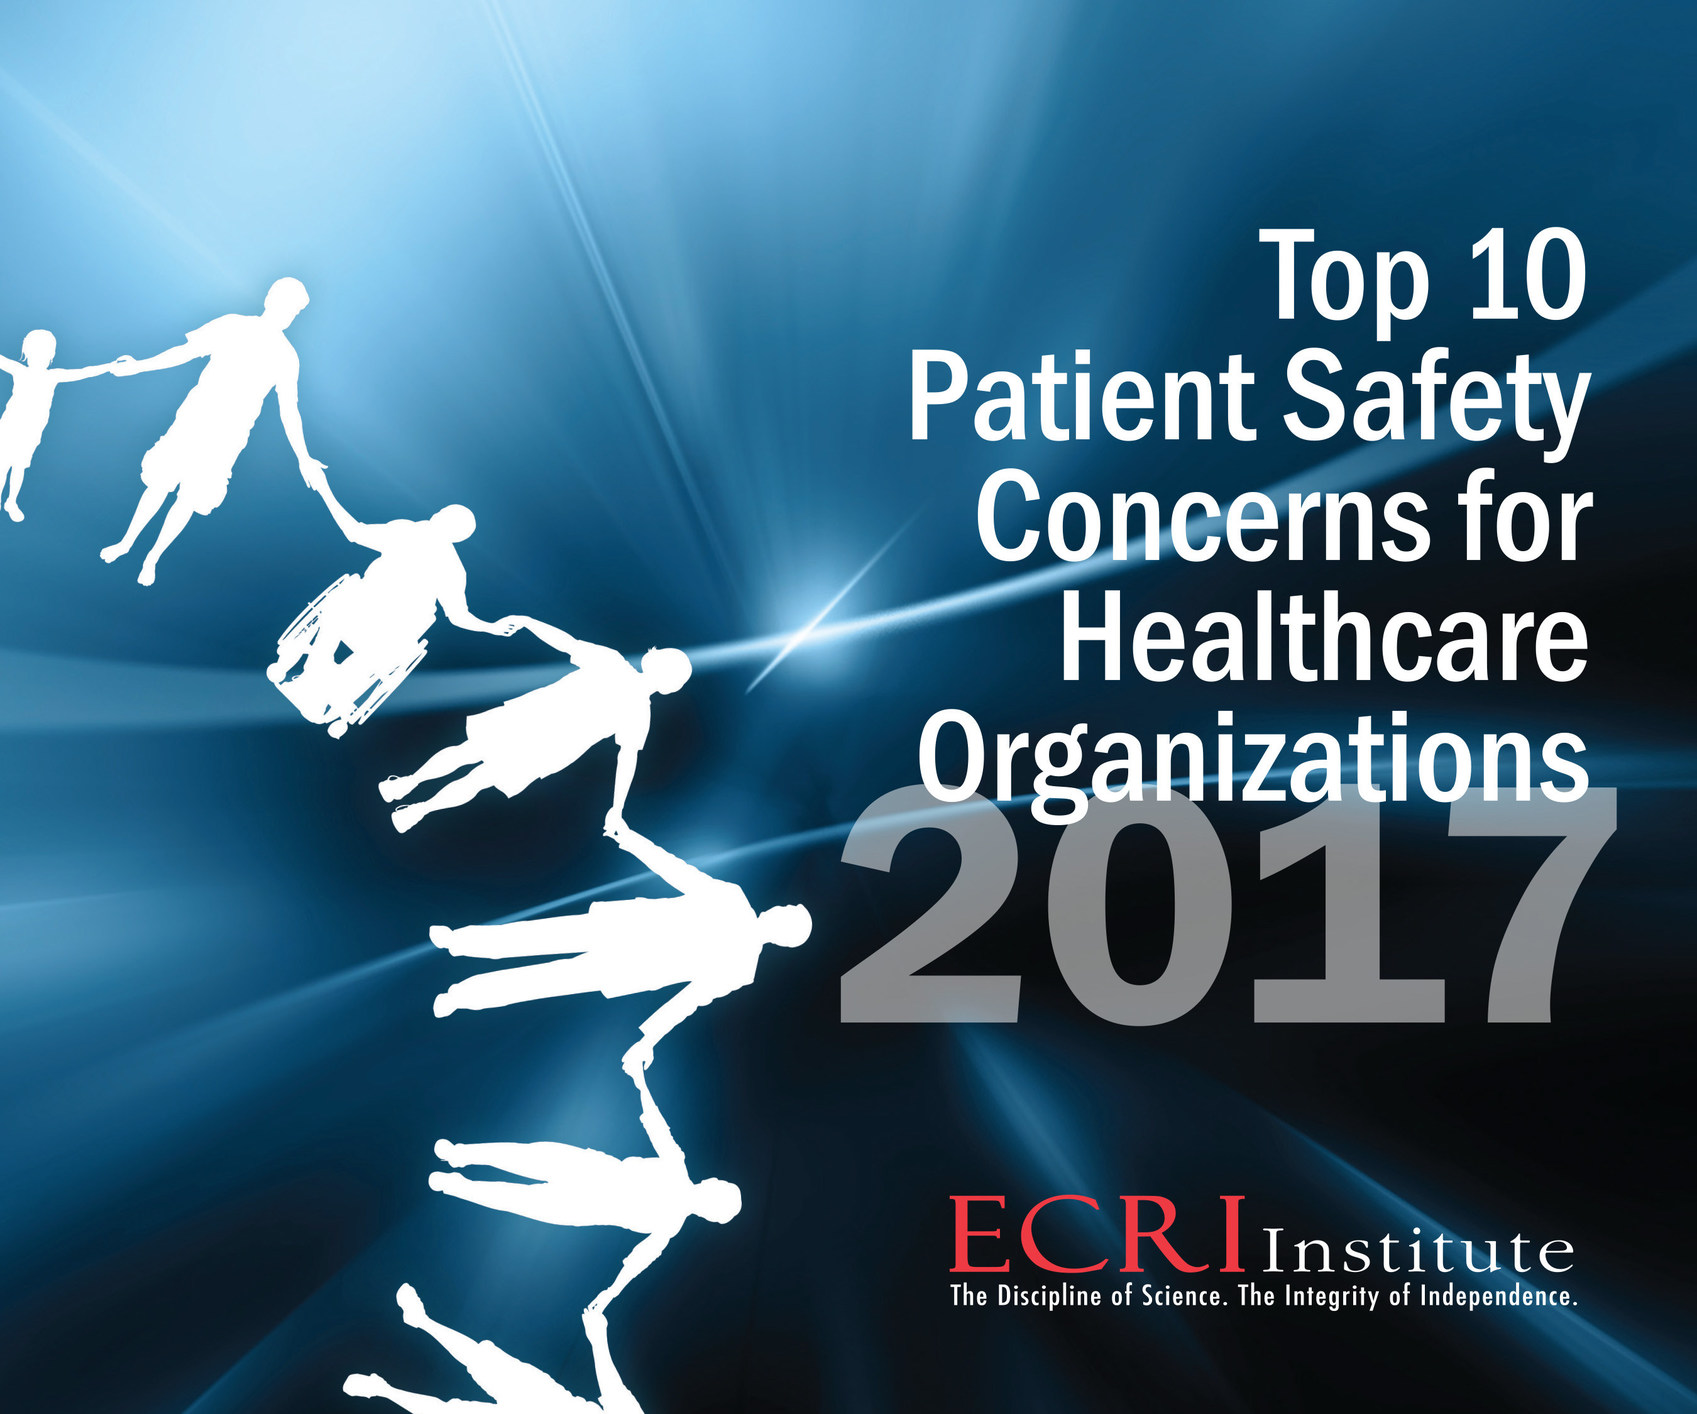 ECRI Institute Names Top 10 Patient Safety Concerns for 20171697 x 1414